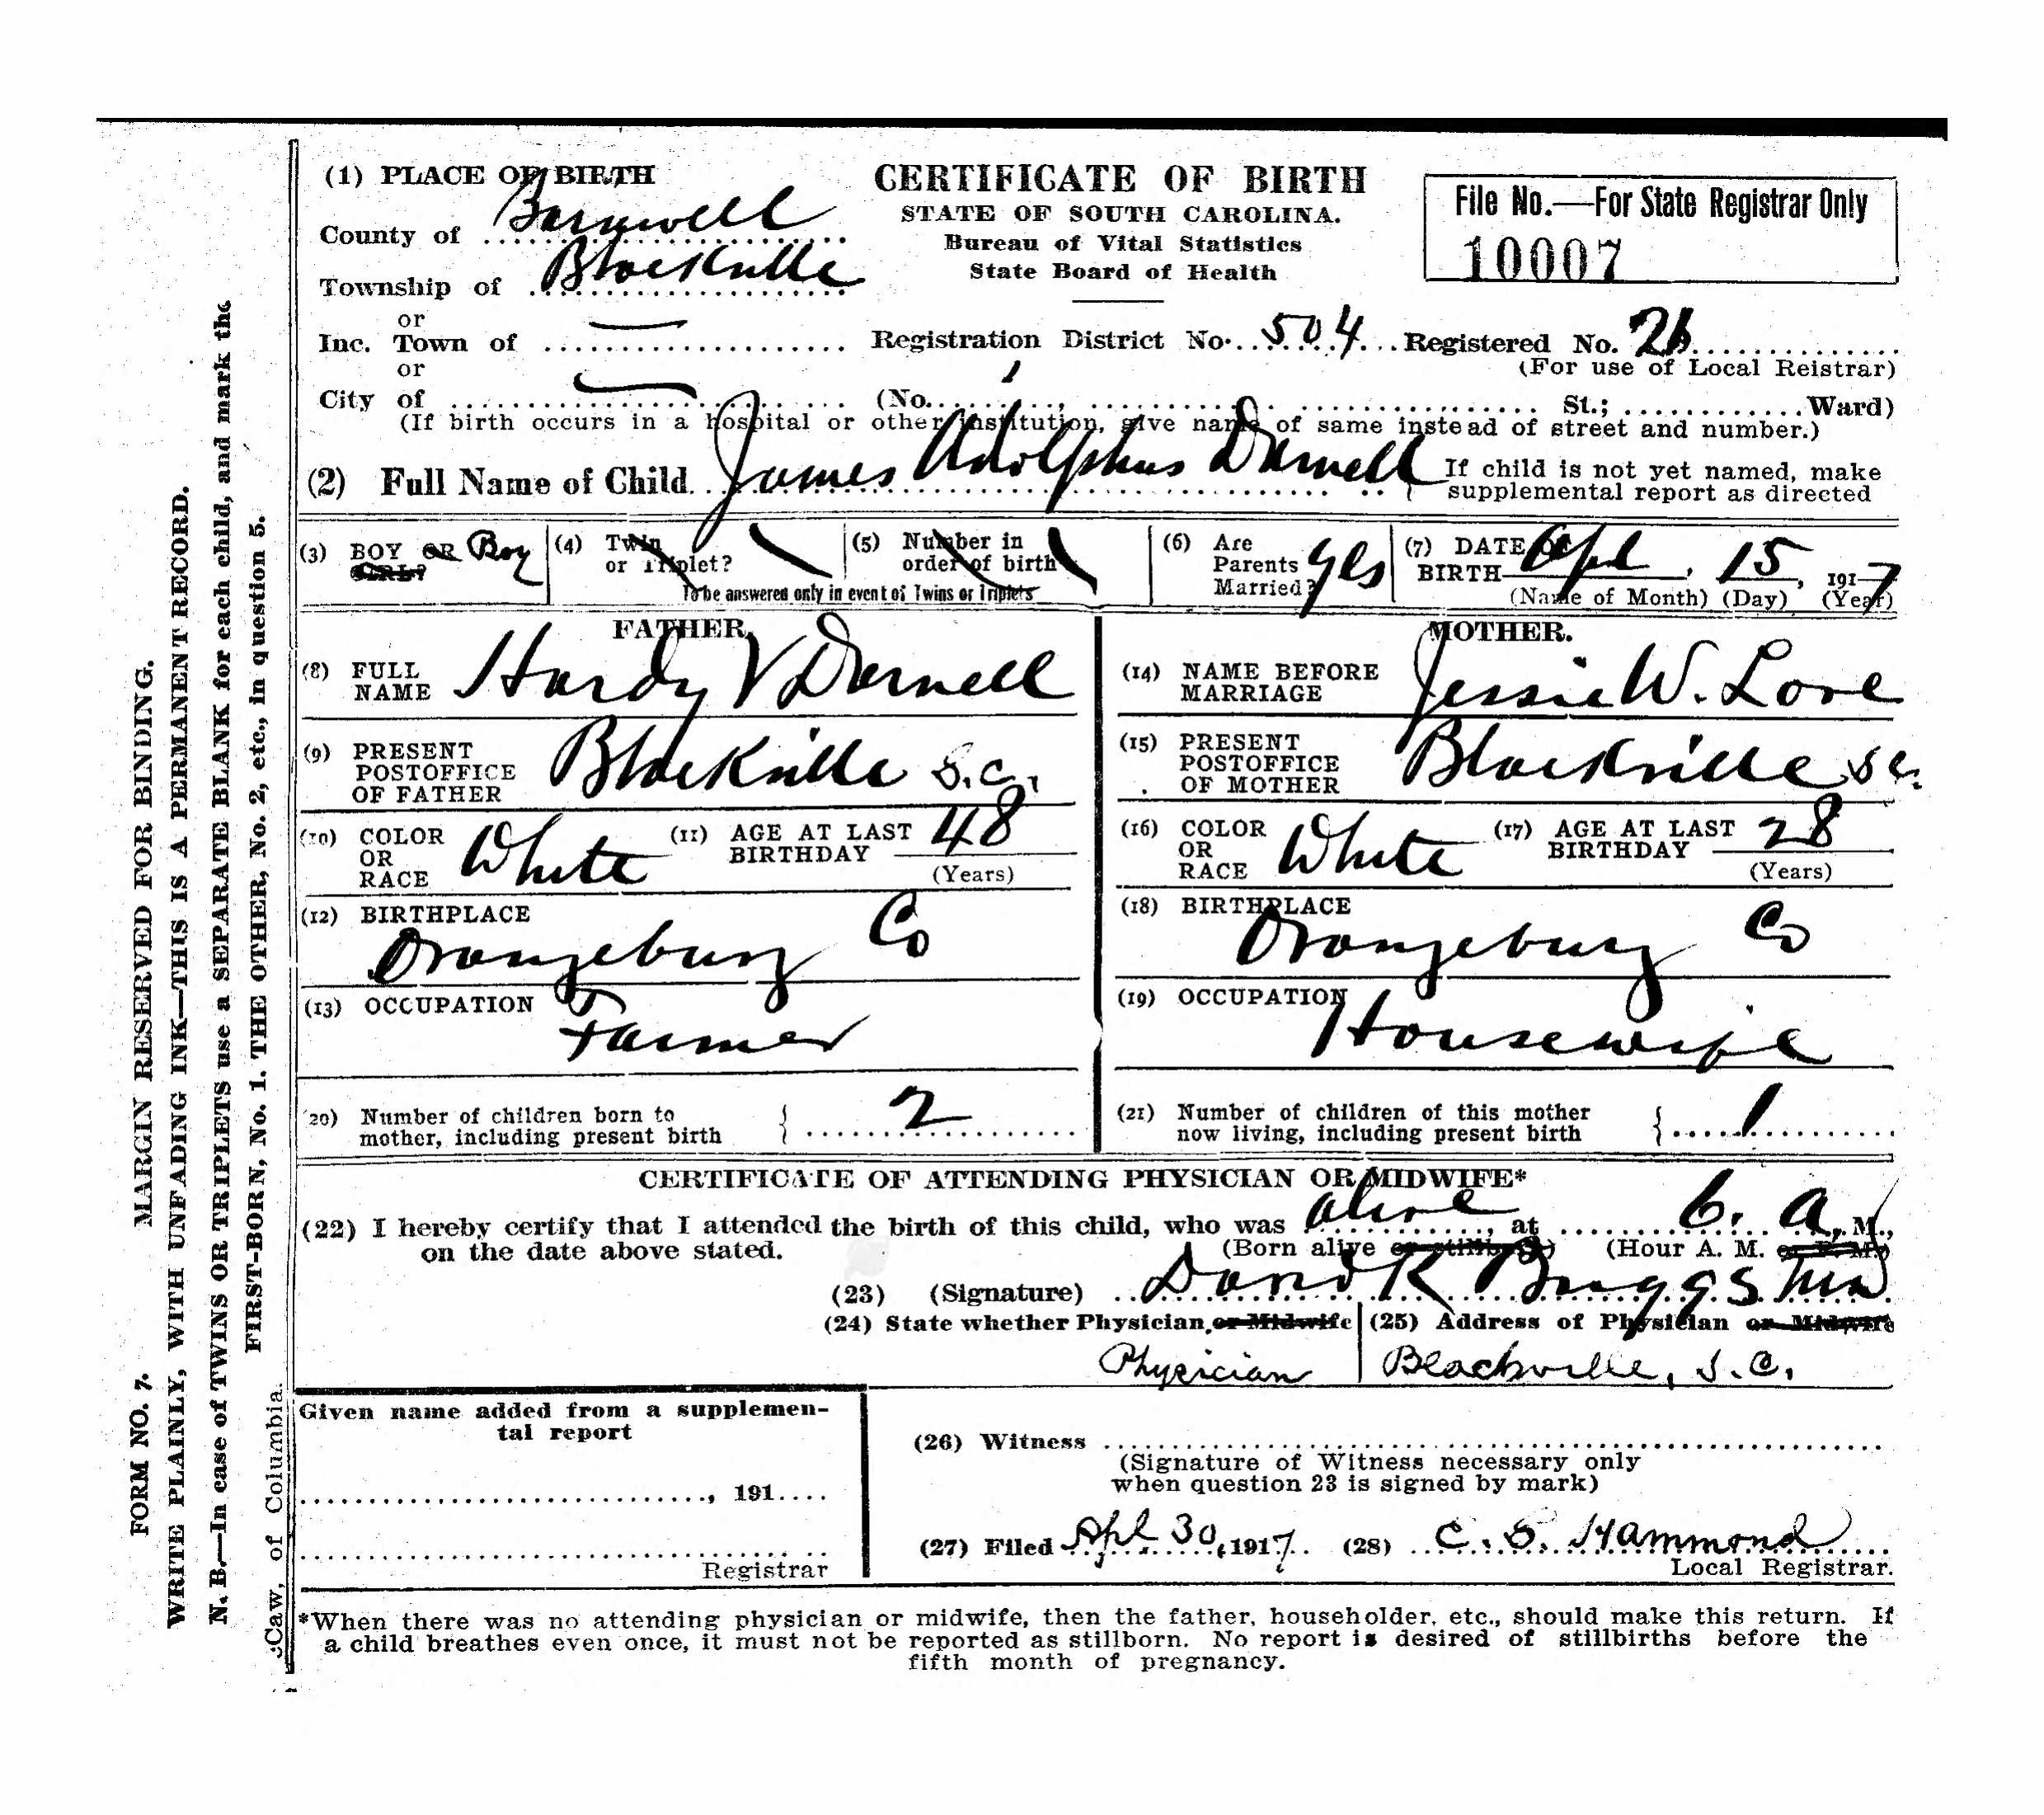 Image of a birth certificate filled out with information about the newborn and their parents.